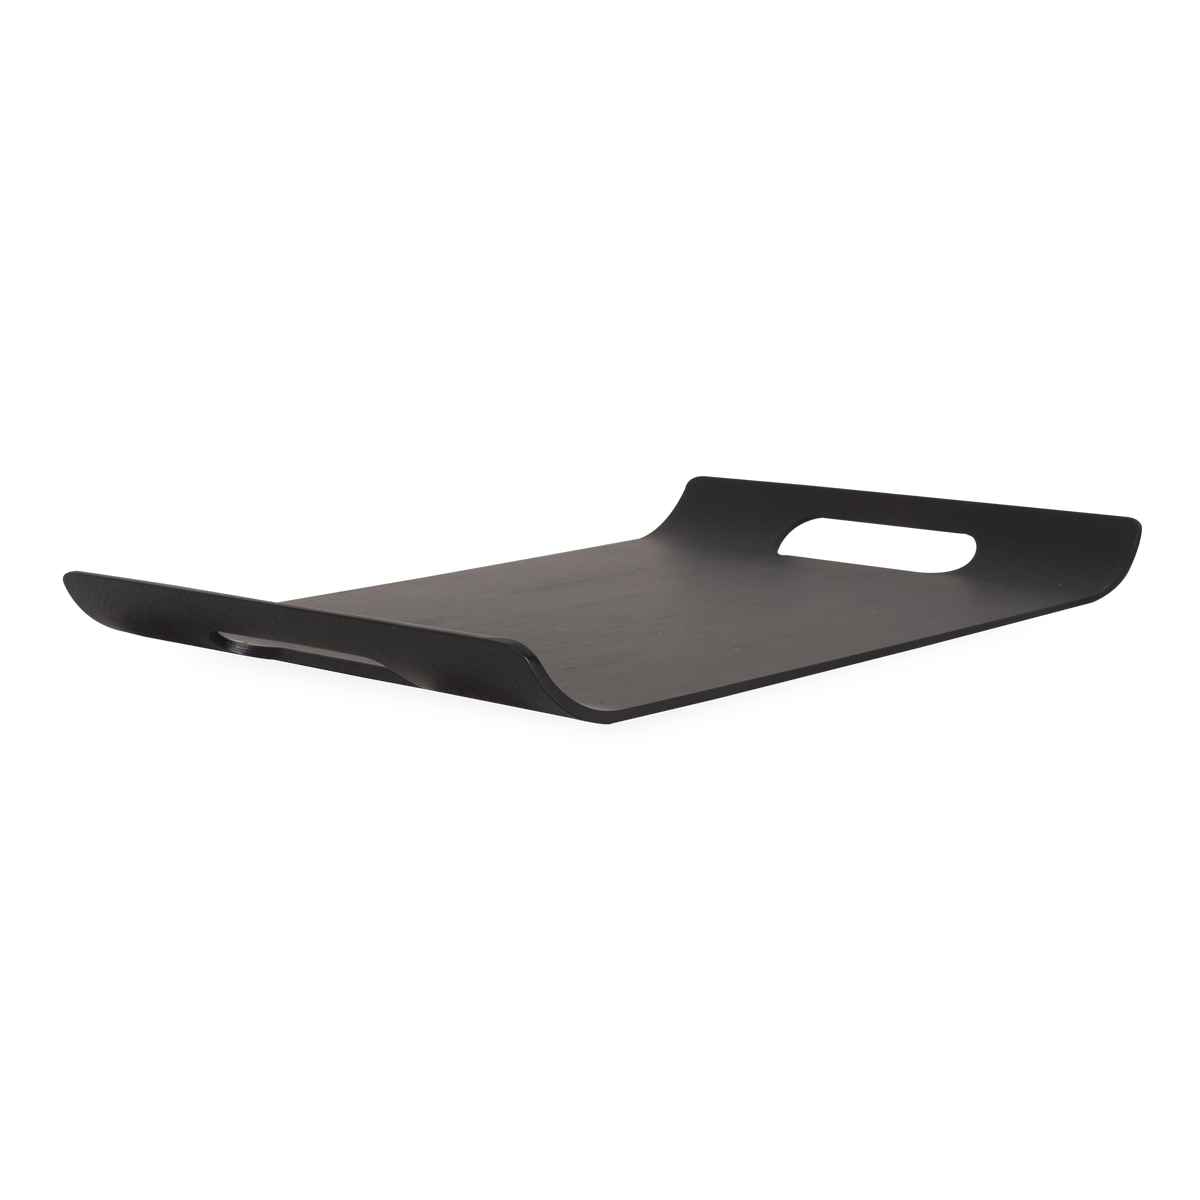 Using a simplistic yet elegant and functional design, the Hardwood Tray features an exceptionally crafted curved wood body with handle cutouts and a subtle anti-slip surface.